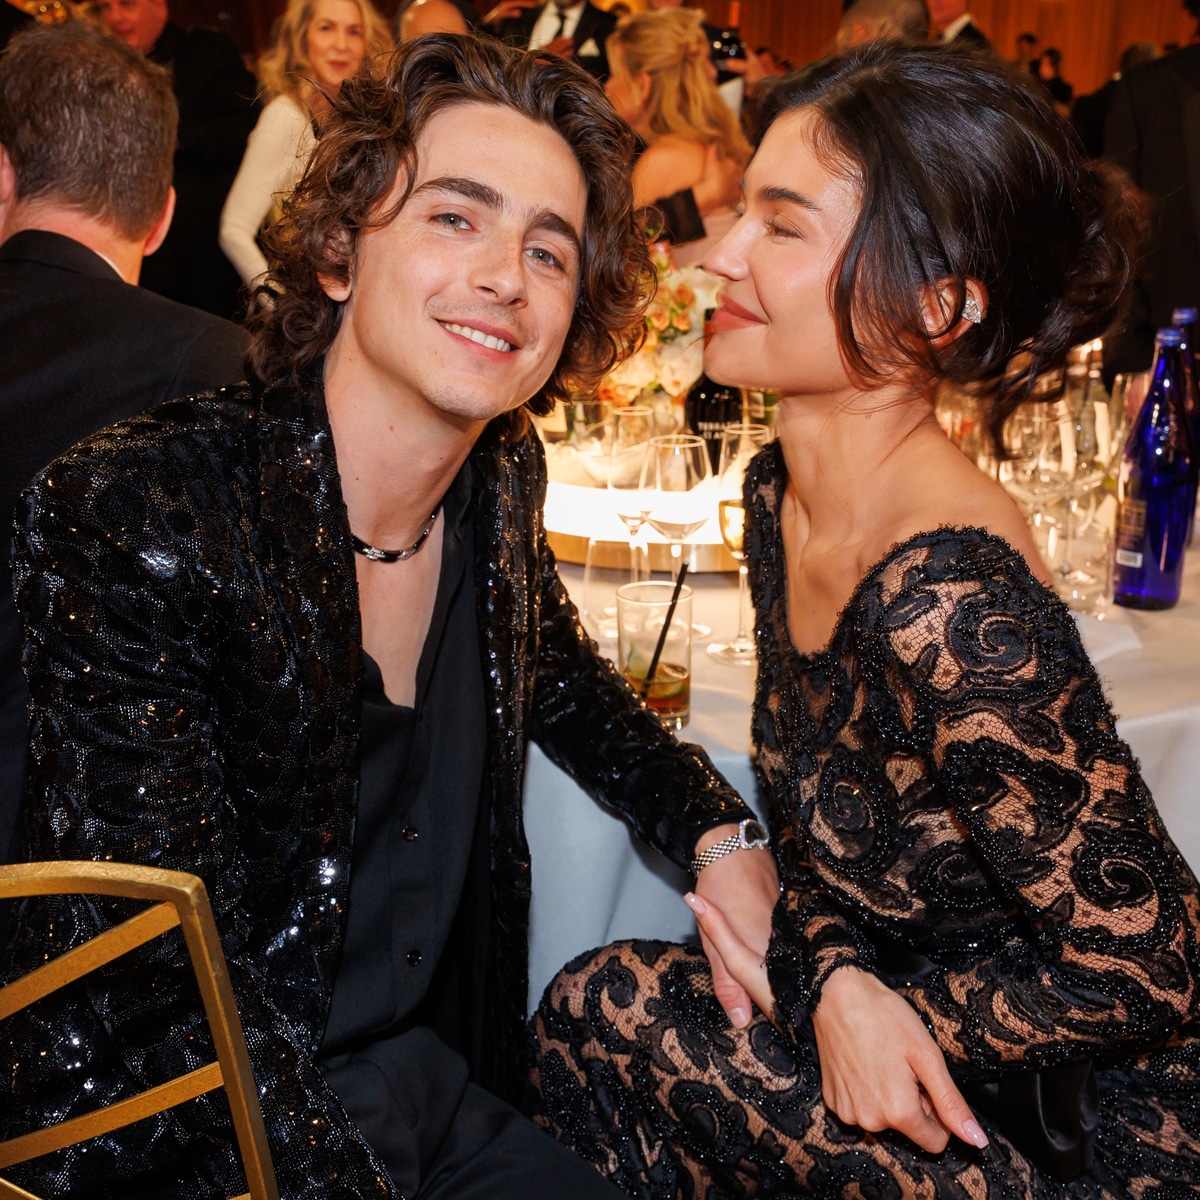 Kylie Jenner and Timothee Chalamet's Very Public but Private Romance